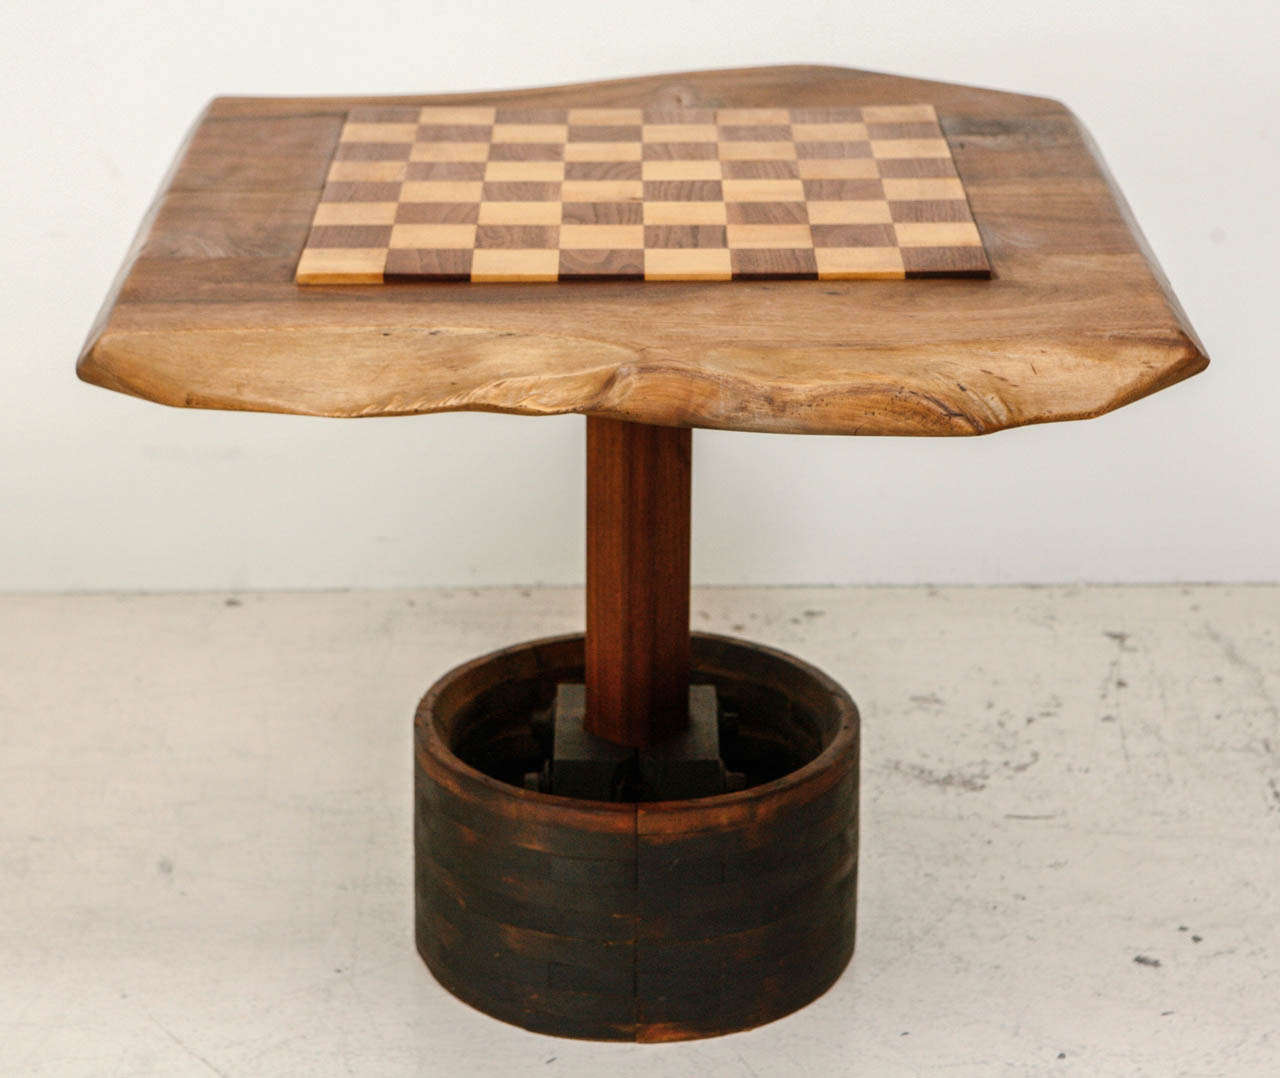 Game Table by James Camp (1901-2008) for J. Camp Designs. Signed and dated.